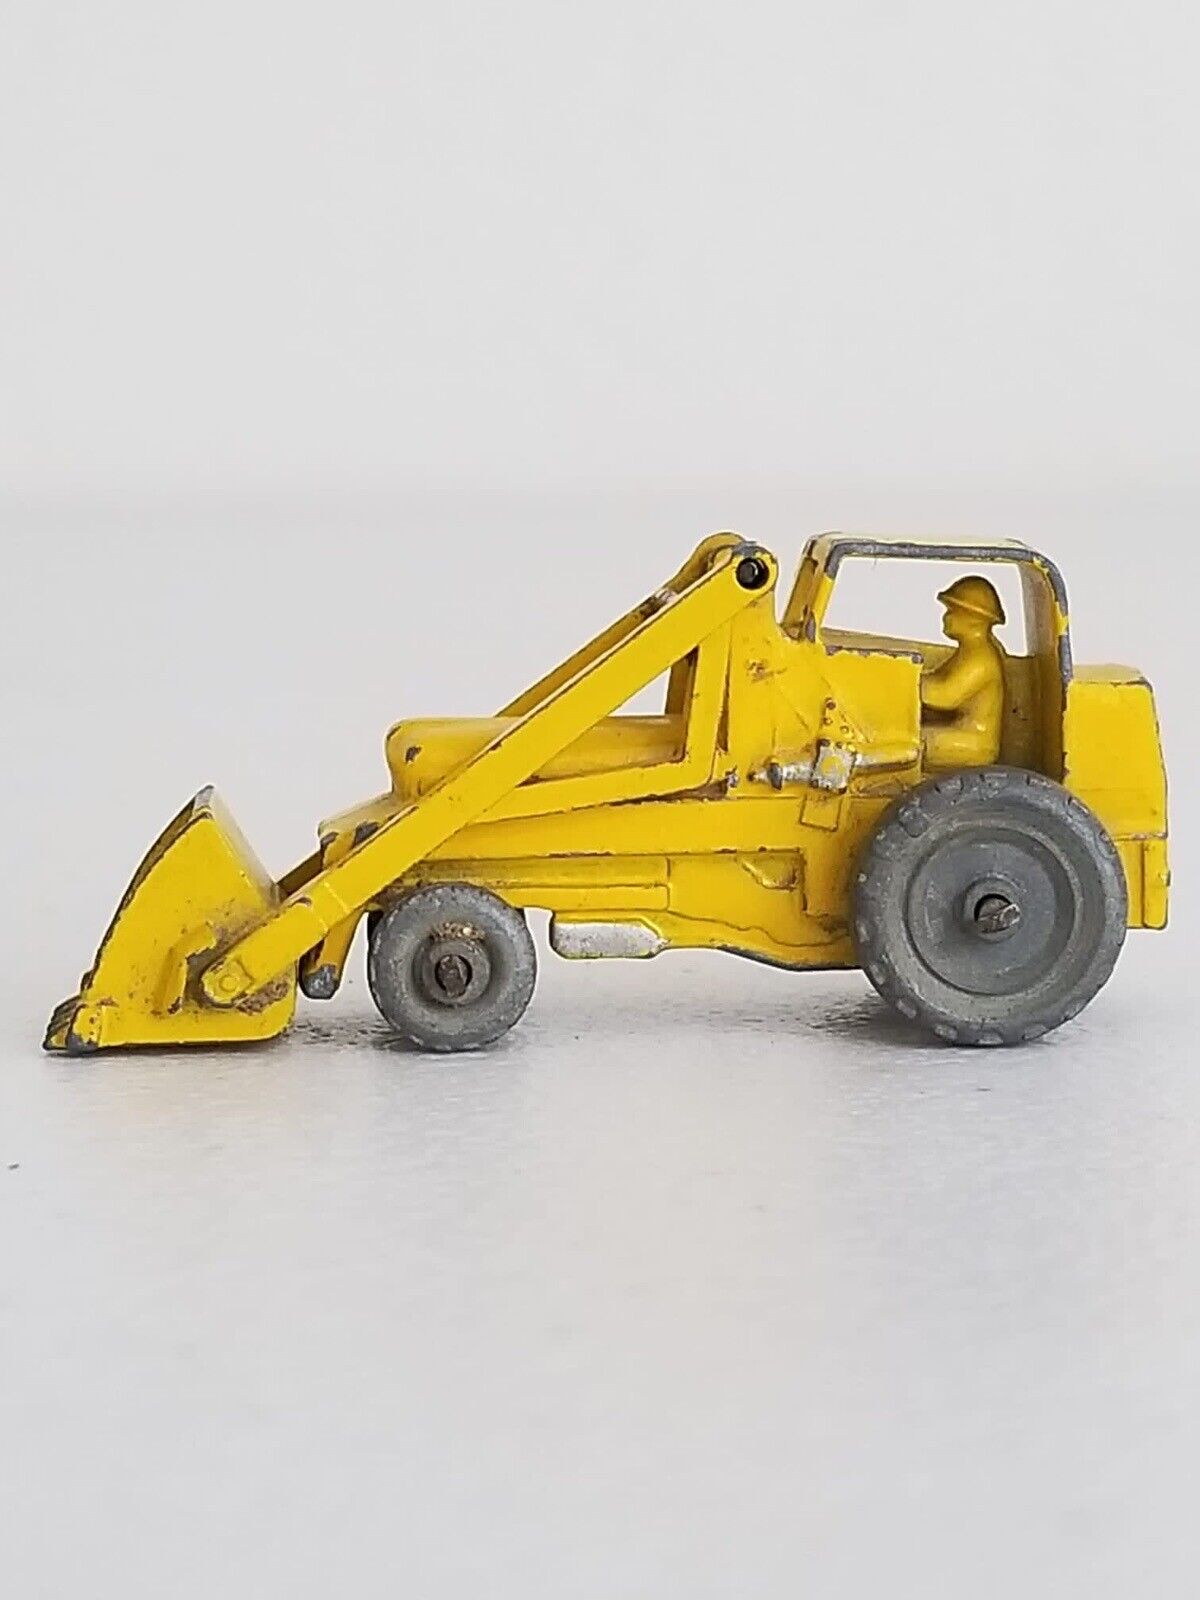 Vintage Lesney Matchbox No. 24 Weatherill Hydraulic Shovel Toy with Grey Tires - Made in England - TreasuTiques